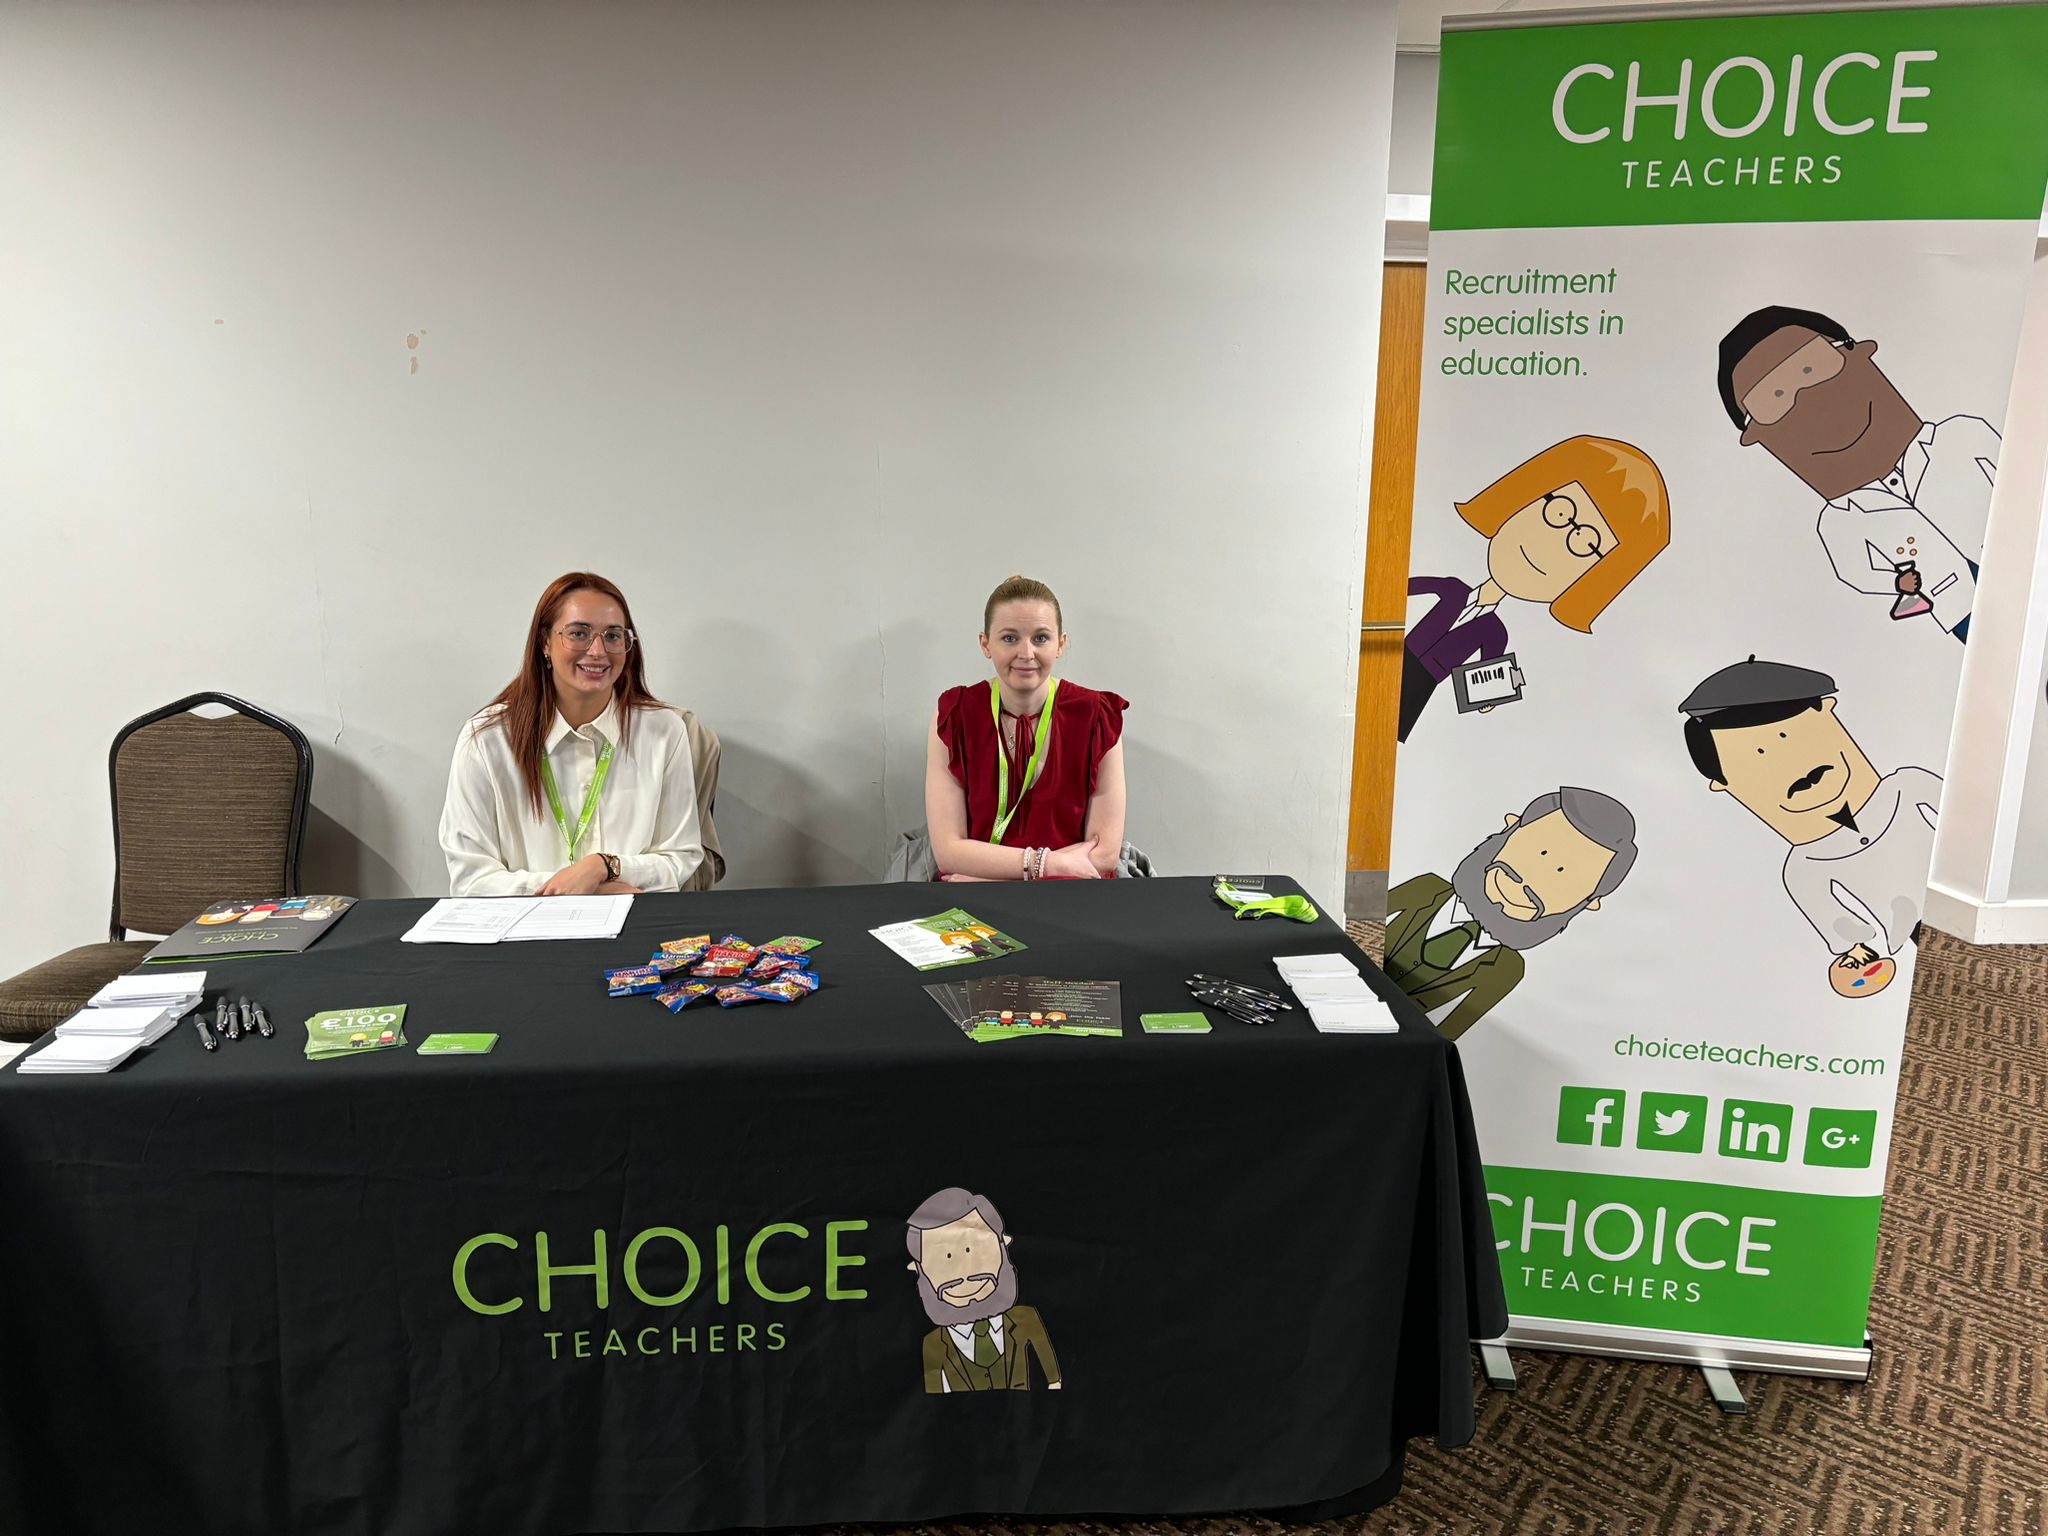 Choice Teachers at our event in Wigan